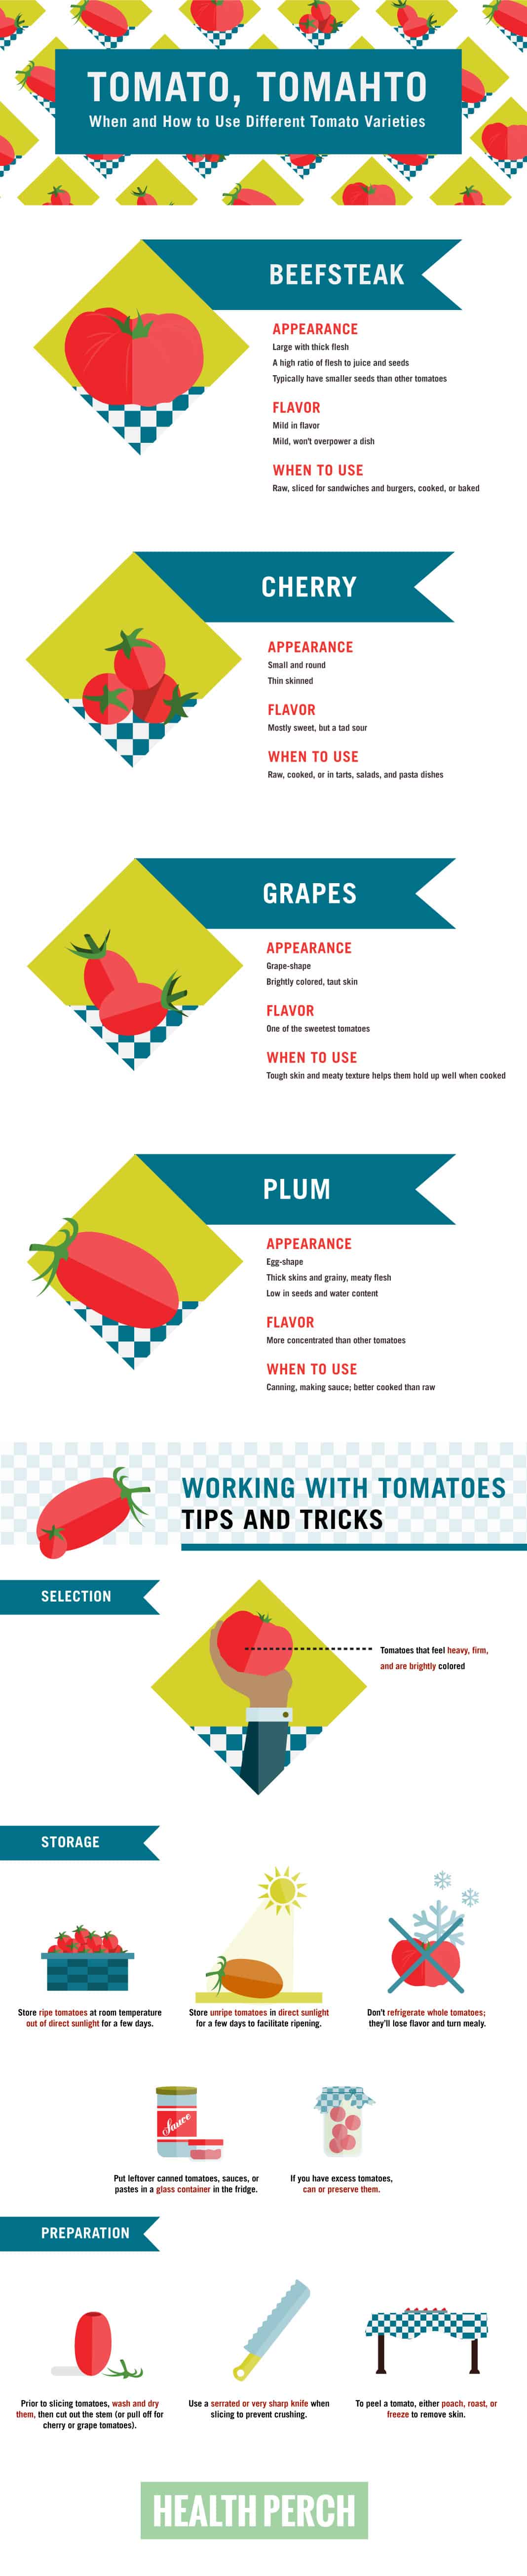 Tomato, Tomahto: When and How to Use Different Tomato Varieties infographic from the article: Canning Tomato Sauce: Peel and Process Using a Food Mill | A Domestic Wildflower click to read the recipe and watch the canning tutorial video and see how easy canning can be!